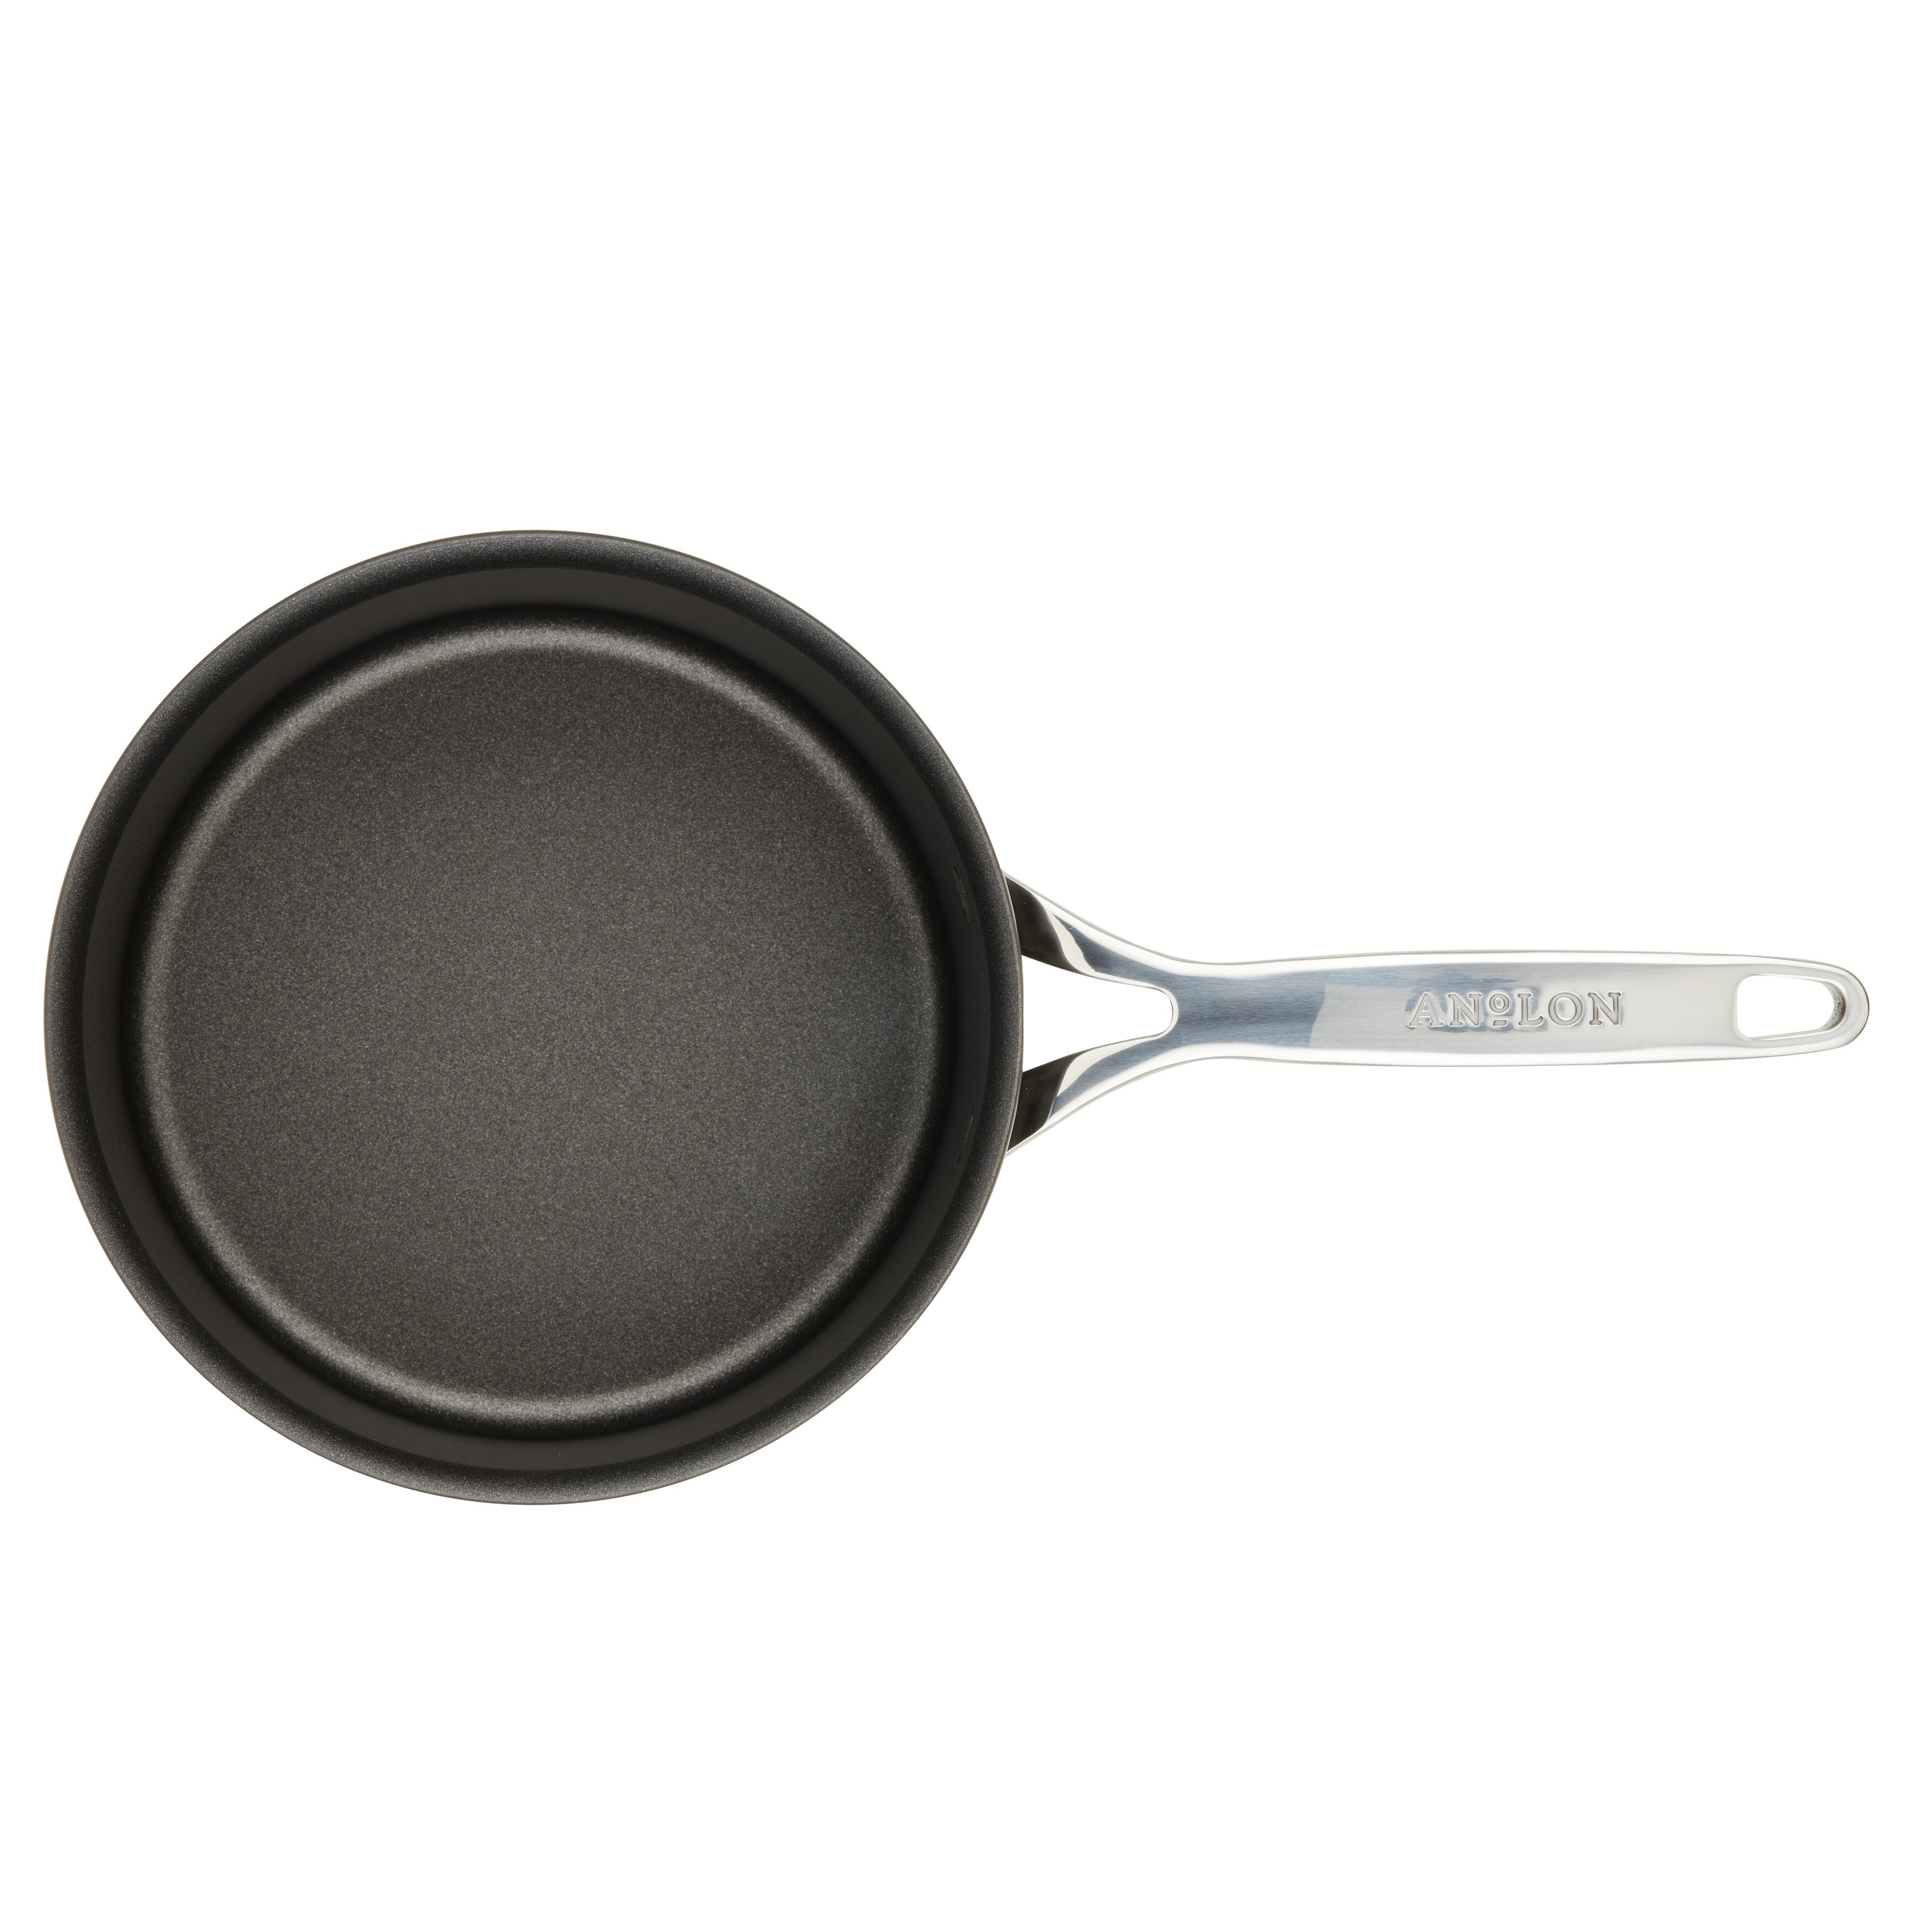 https://ak1.ostkcdn.com/images/products/is/images/direct/4f397b75c9d7d49f274e1aecfd0b7f69ed2ca3df/Anolon-Ascend-Hard-Anodized-Nonstick-Saucepan-with-Lid%2C-3-Quart%2C-Bronze.jpg